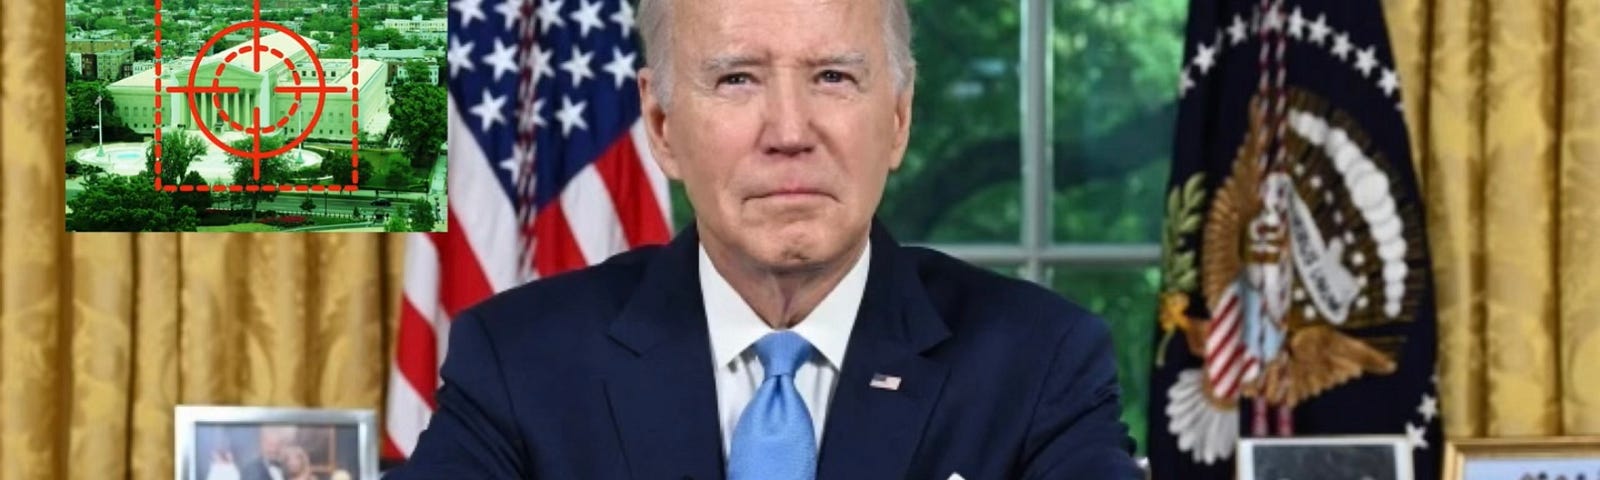 Still from TV of President Biden making an Oval Office address, news chyron has a channel 7 logo and says, “Breaking News — Biden Plans for Immunity” with an inset frame of a drone’s view: green tinted aerial view of the Supreme Court building with a red gunsight centered on it and display text reading, “MQ-1B Predator • special POTUS tasking / Status: loiter / Mode: target acquisition”